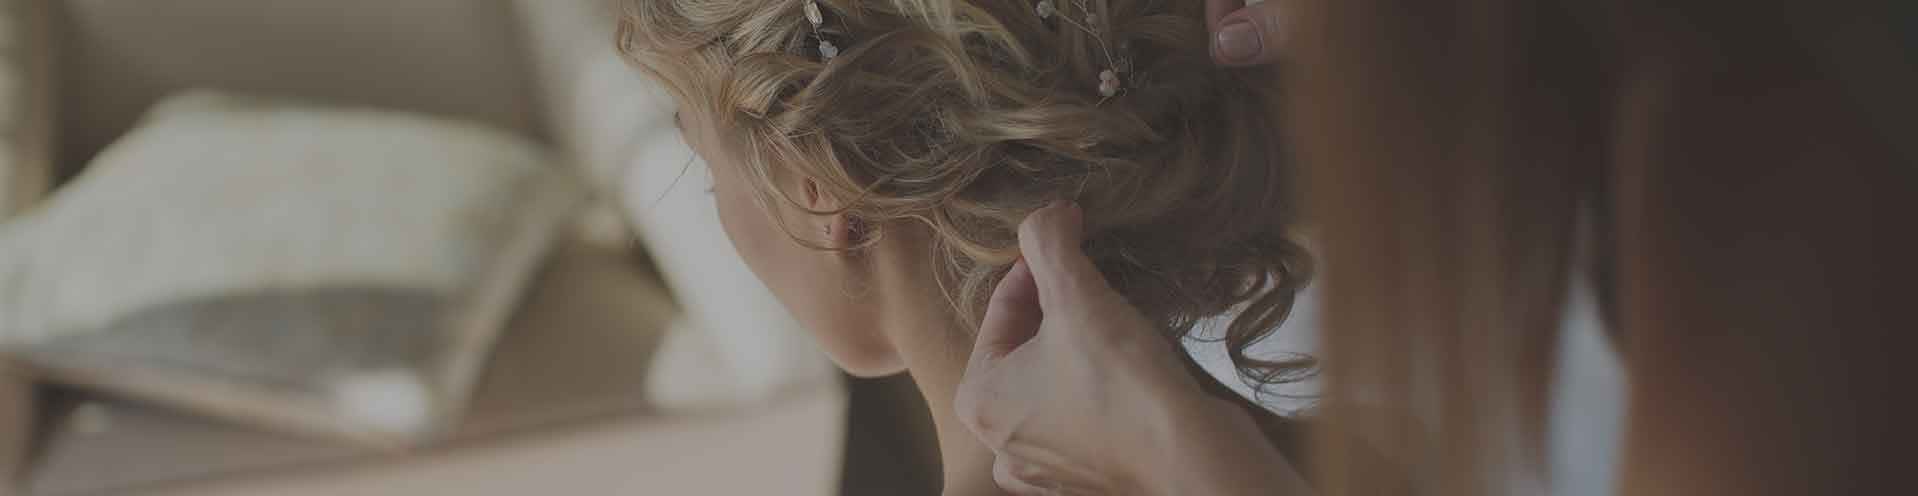 The 10 Best Wedding Hair Stylists in Joondalup, WA - Oneflare